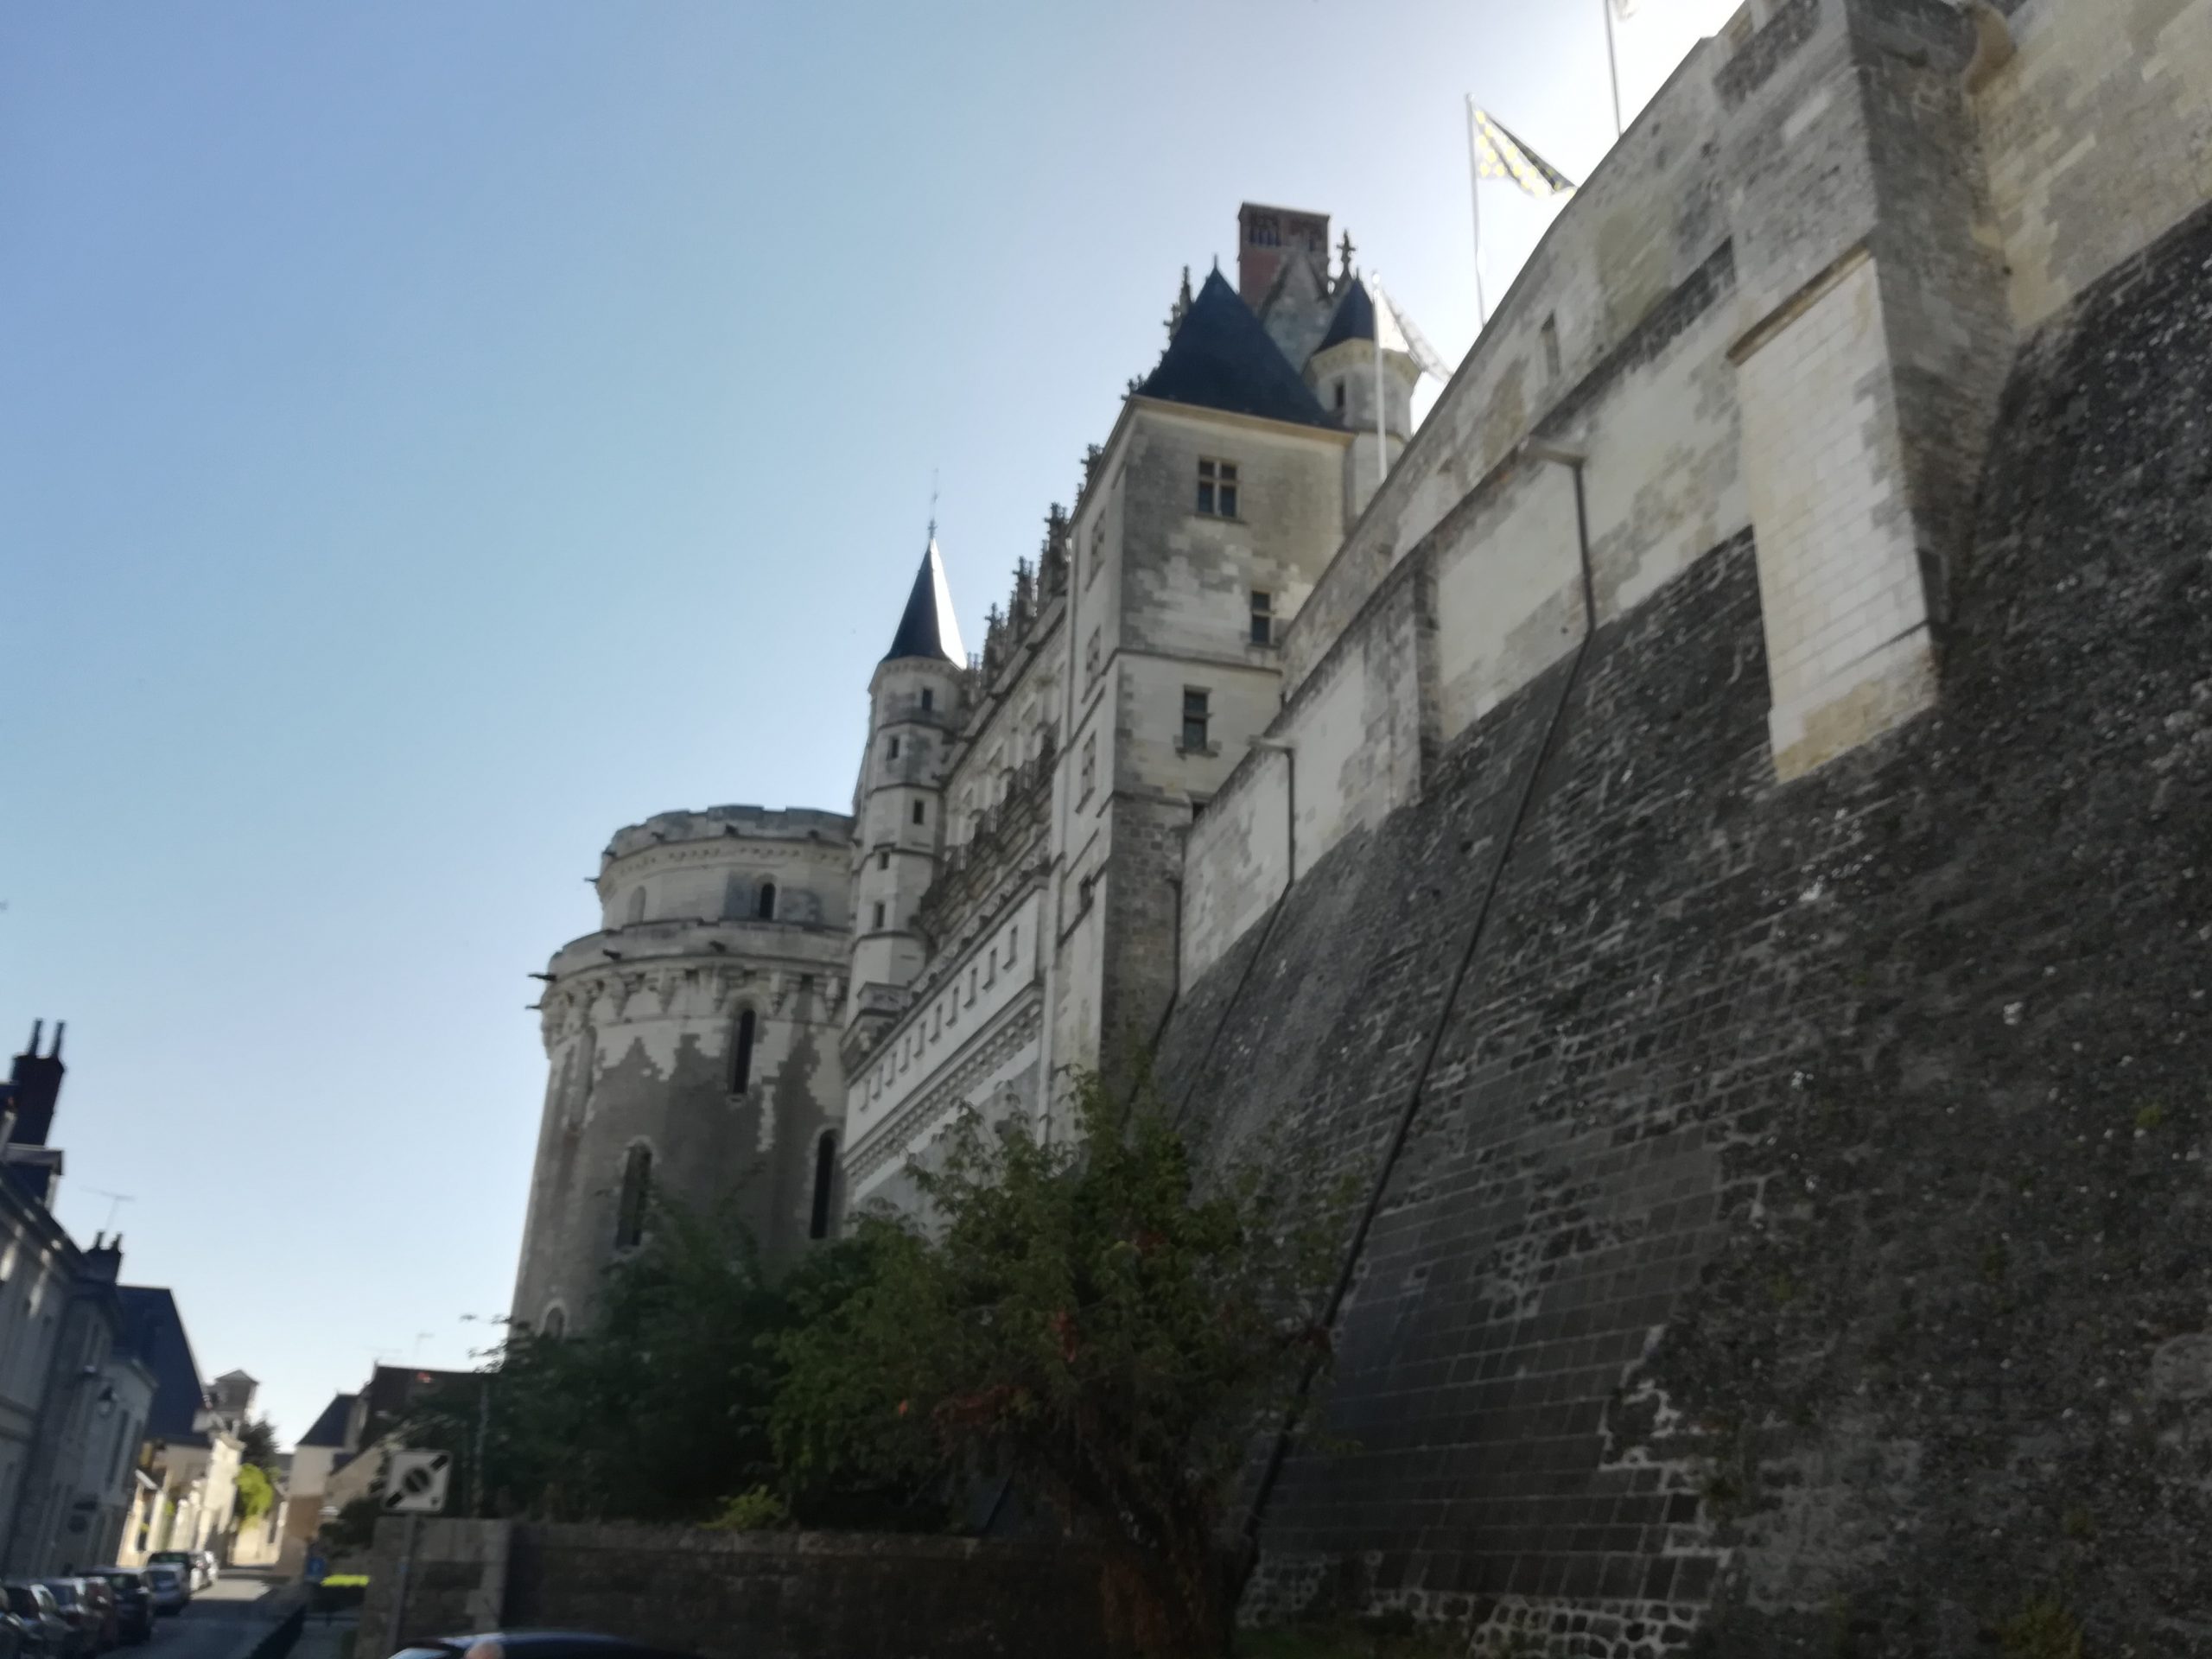 Chateau of Amboise from the streets below